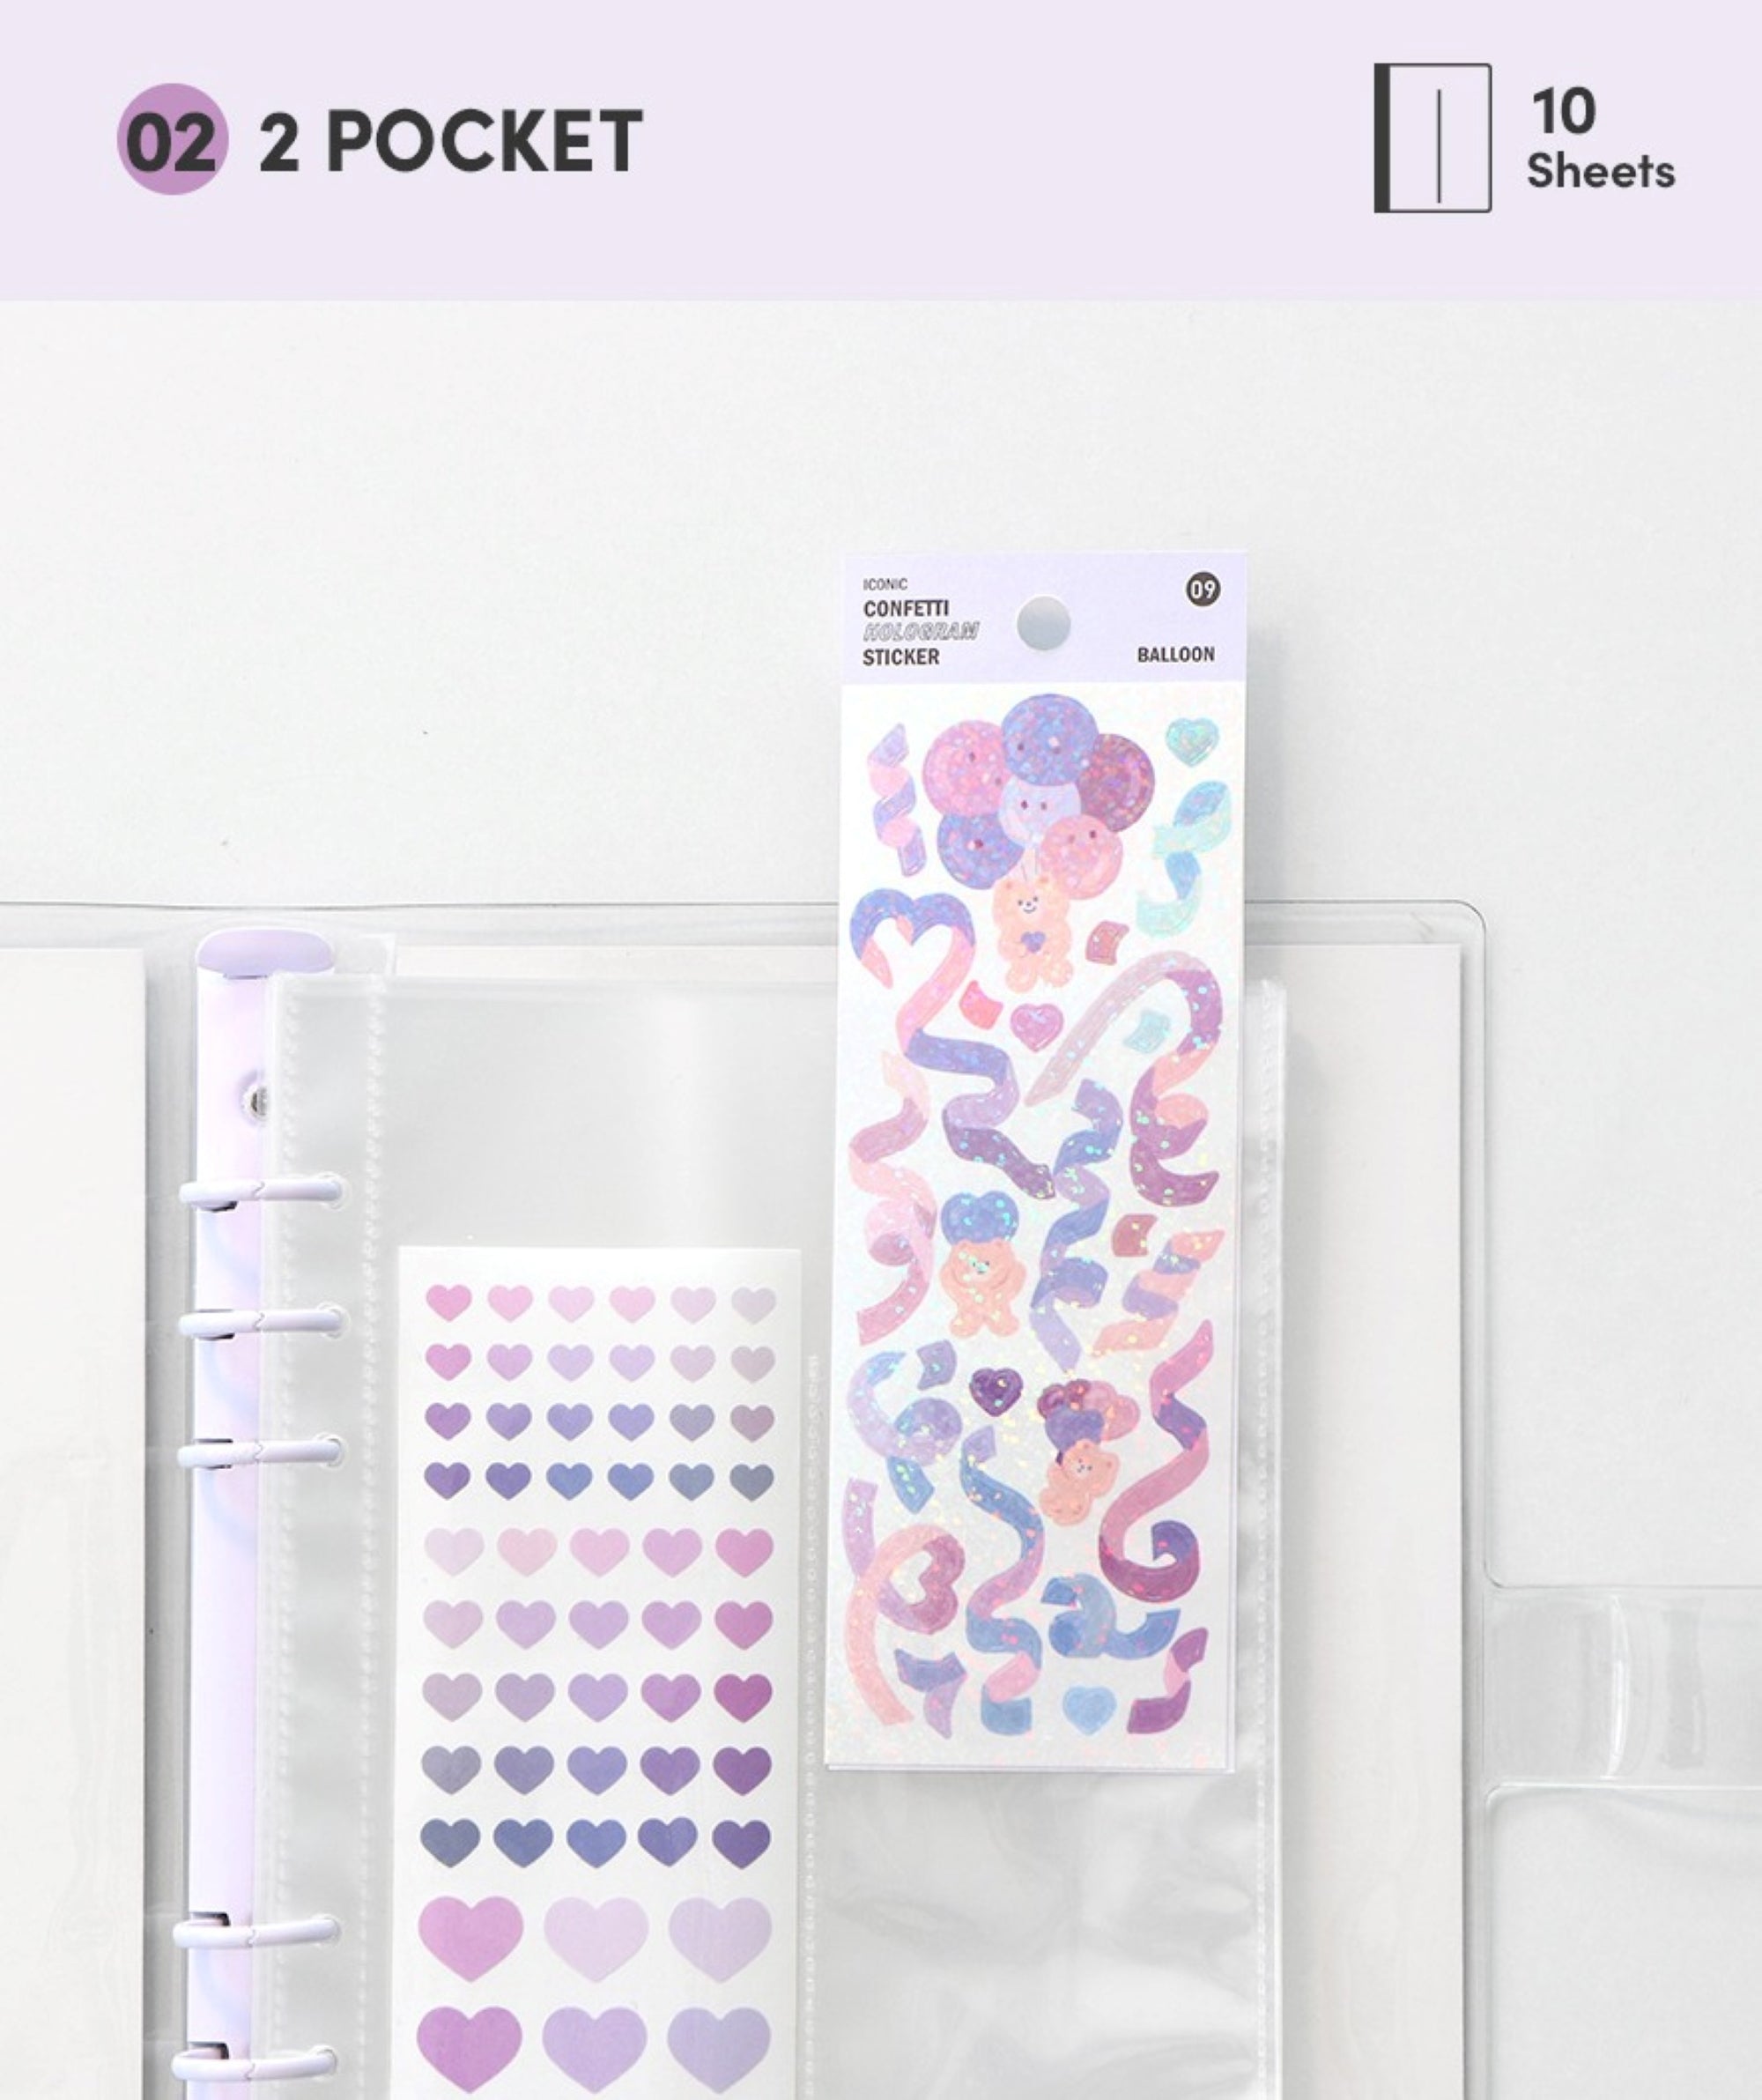 A5 Sticker Binder Refill | 6 Ring Deco Binder Refill | Double-Sided Pocket